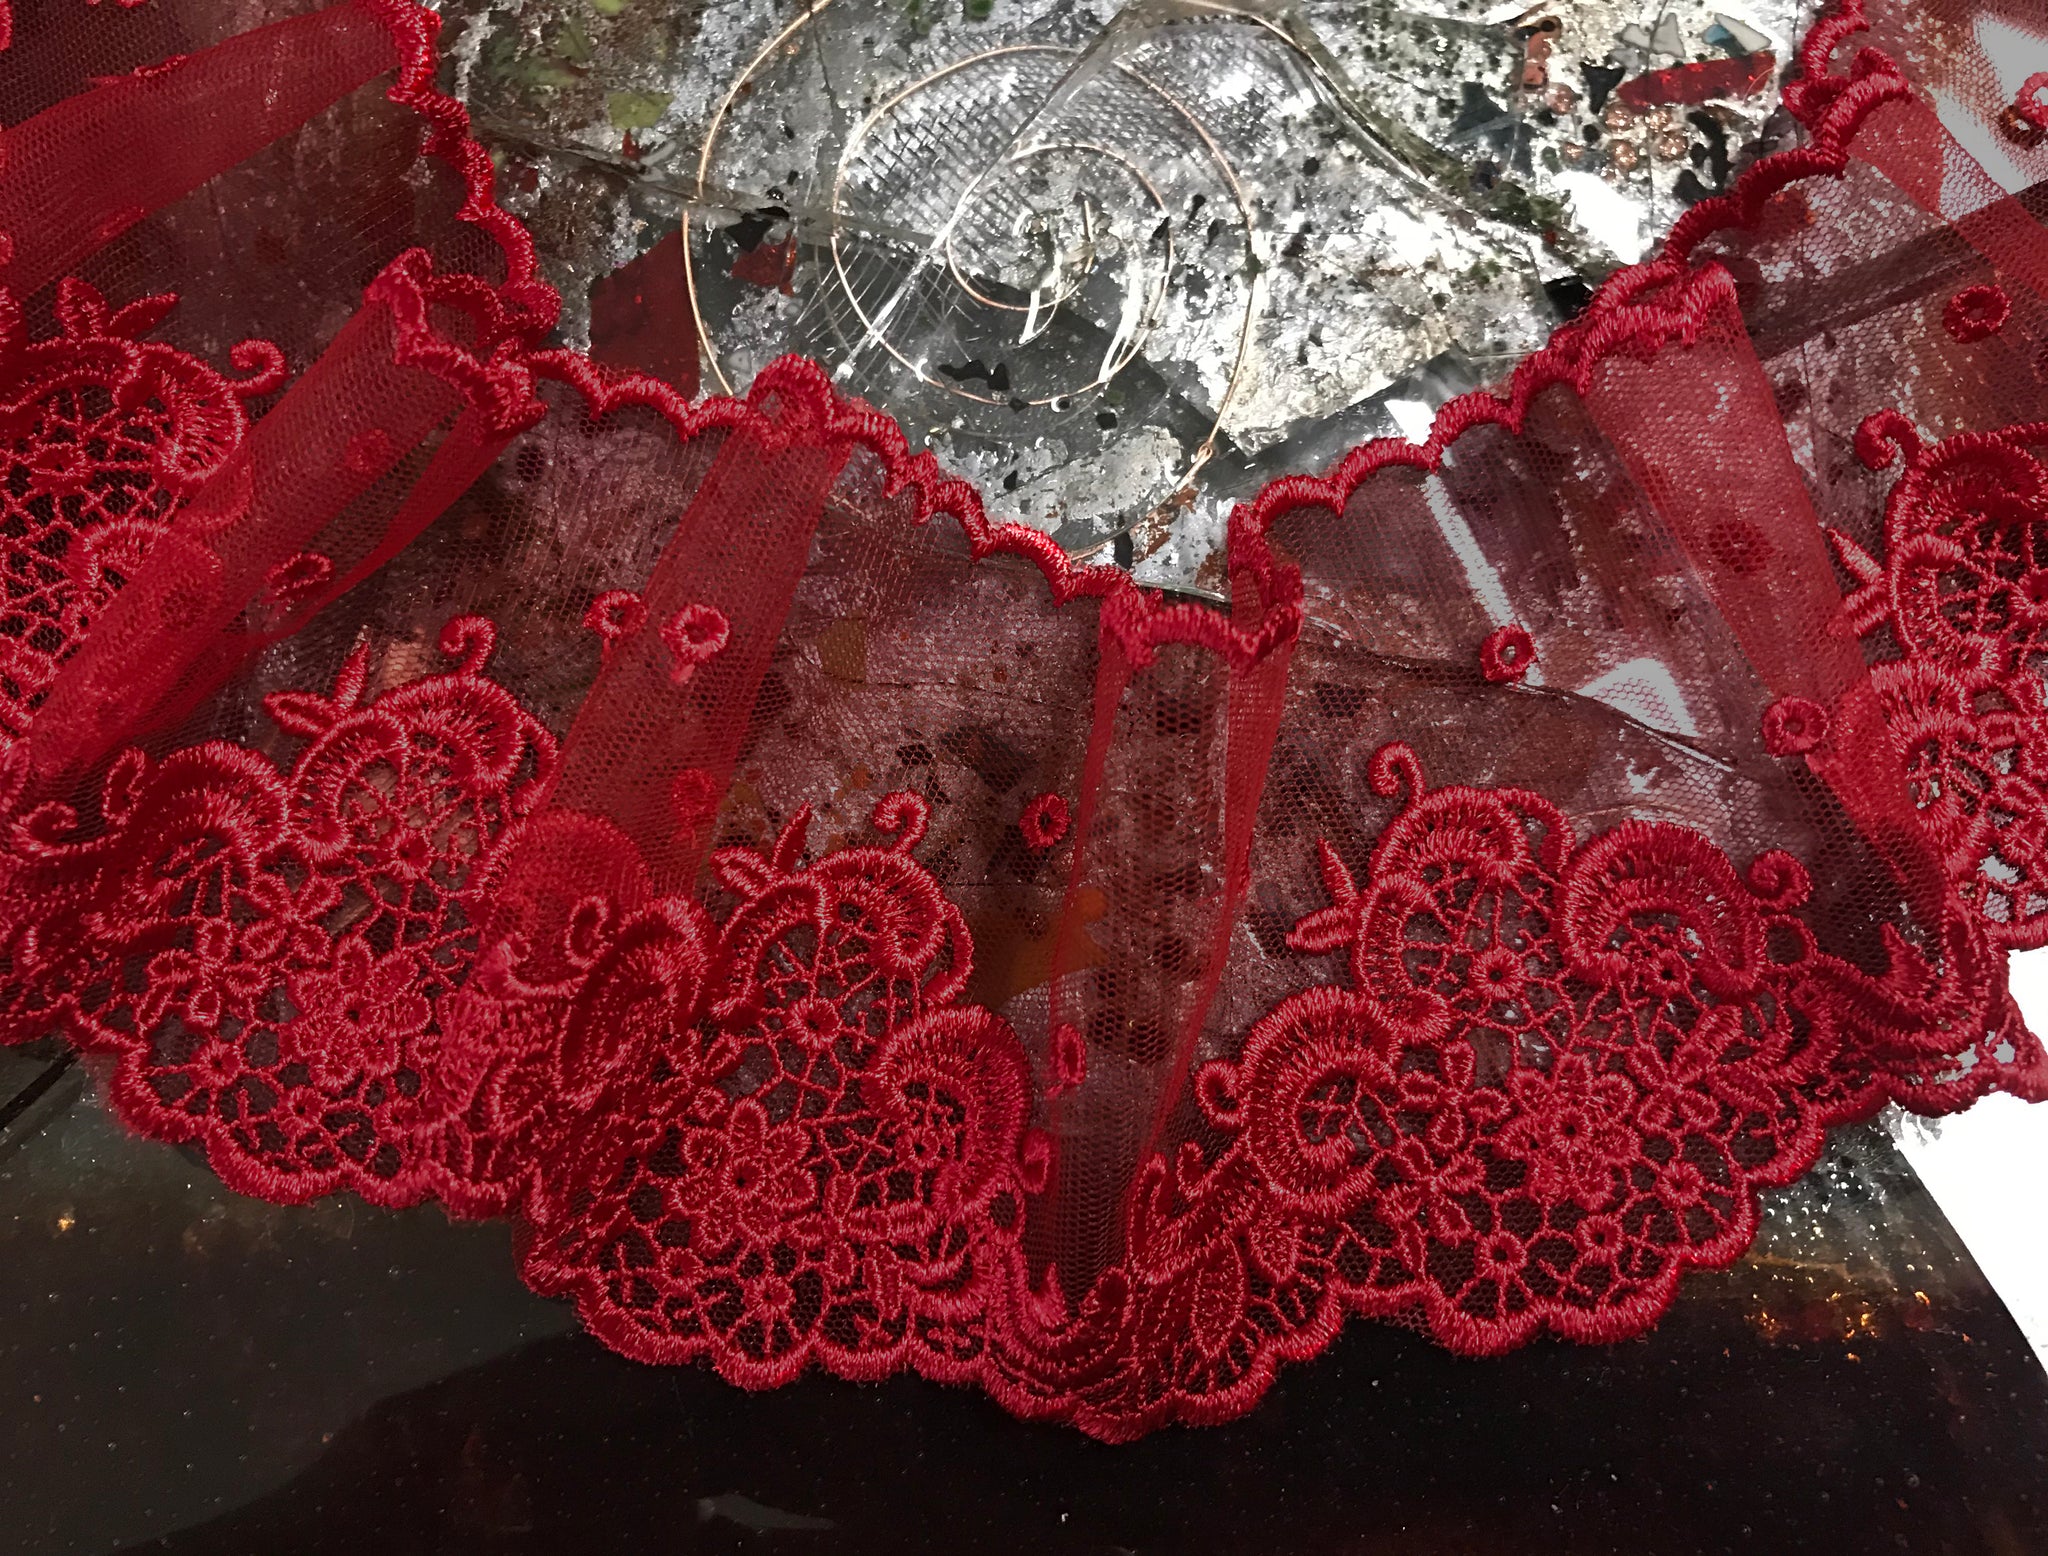 Red Shinny Embroidery on Soft Tulle - Italian Lace - 9 cm Wide.